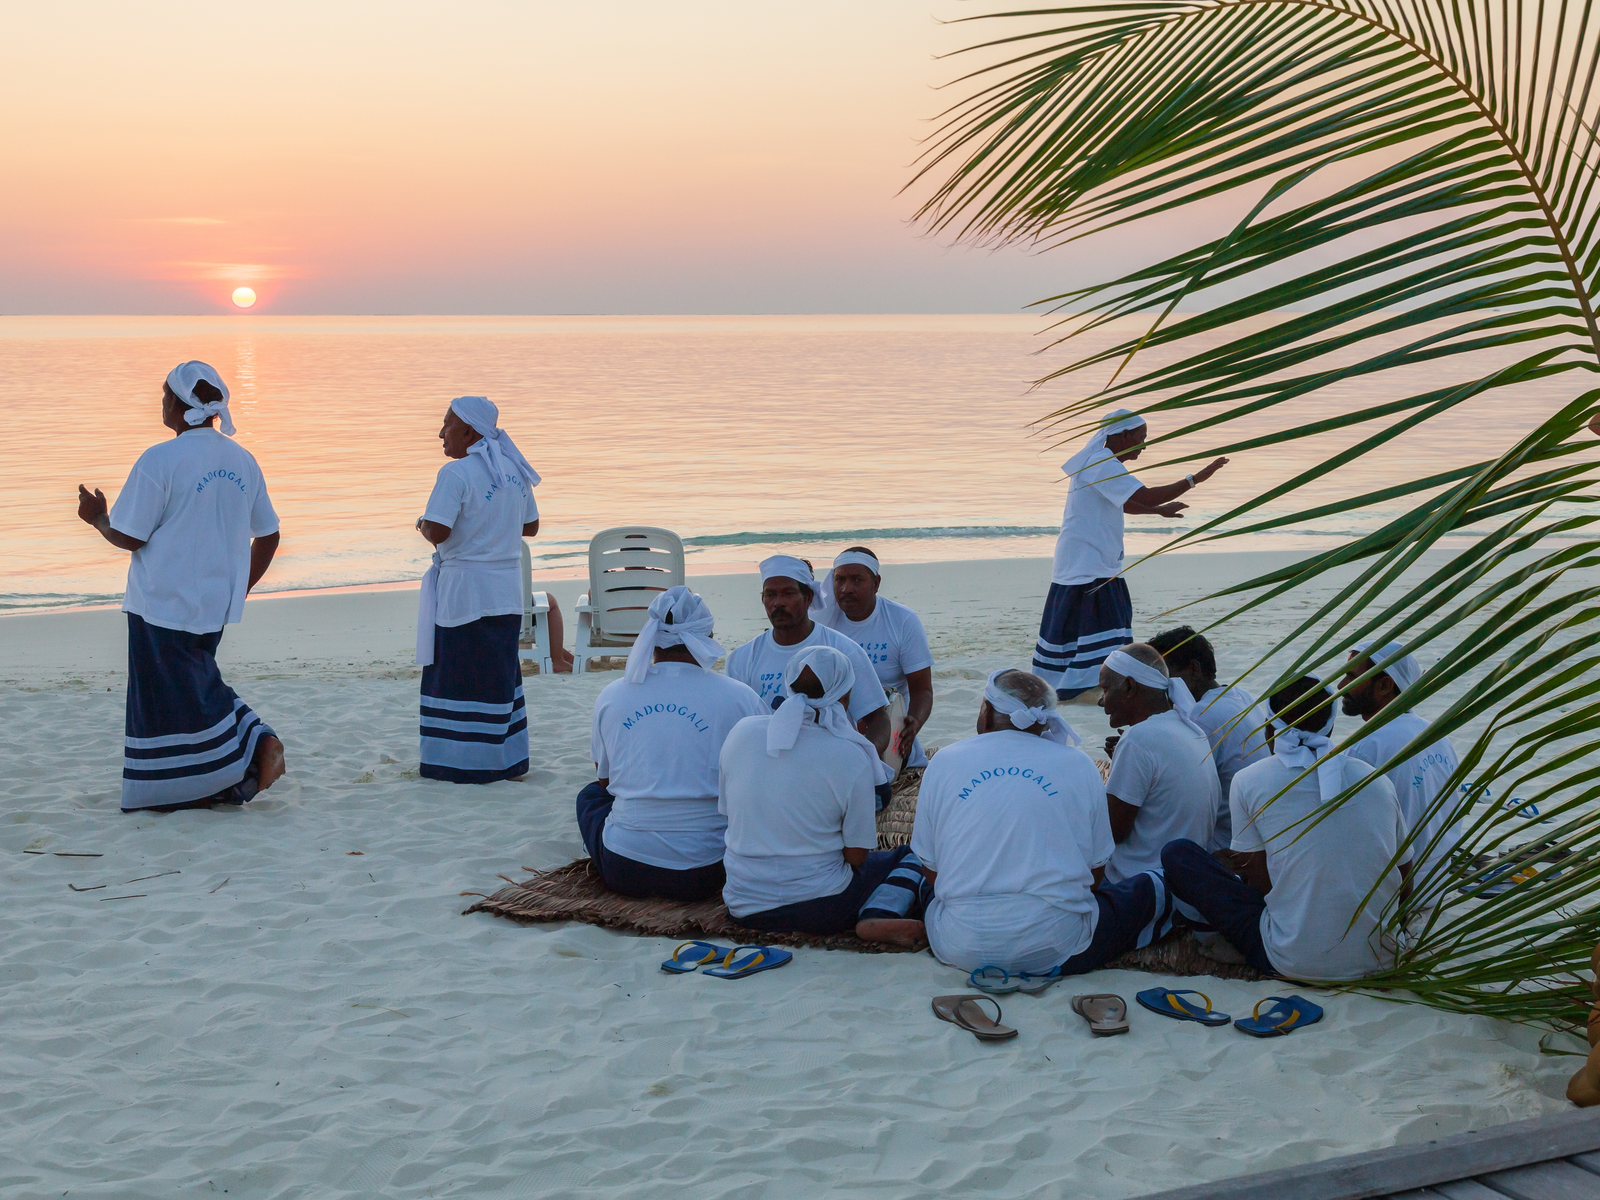 Maldivian locals in white dress sitting on a beach during the best time to visit Maldives